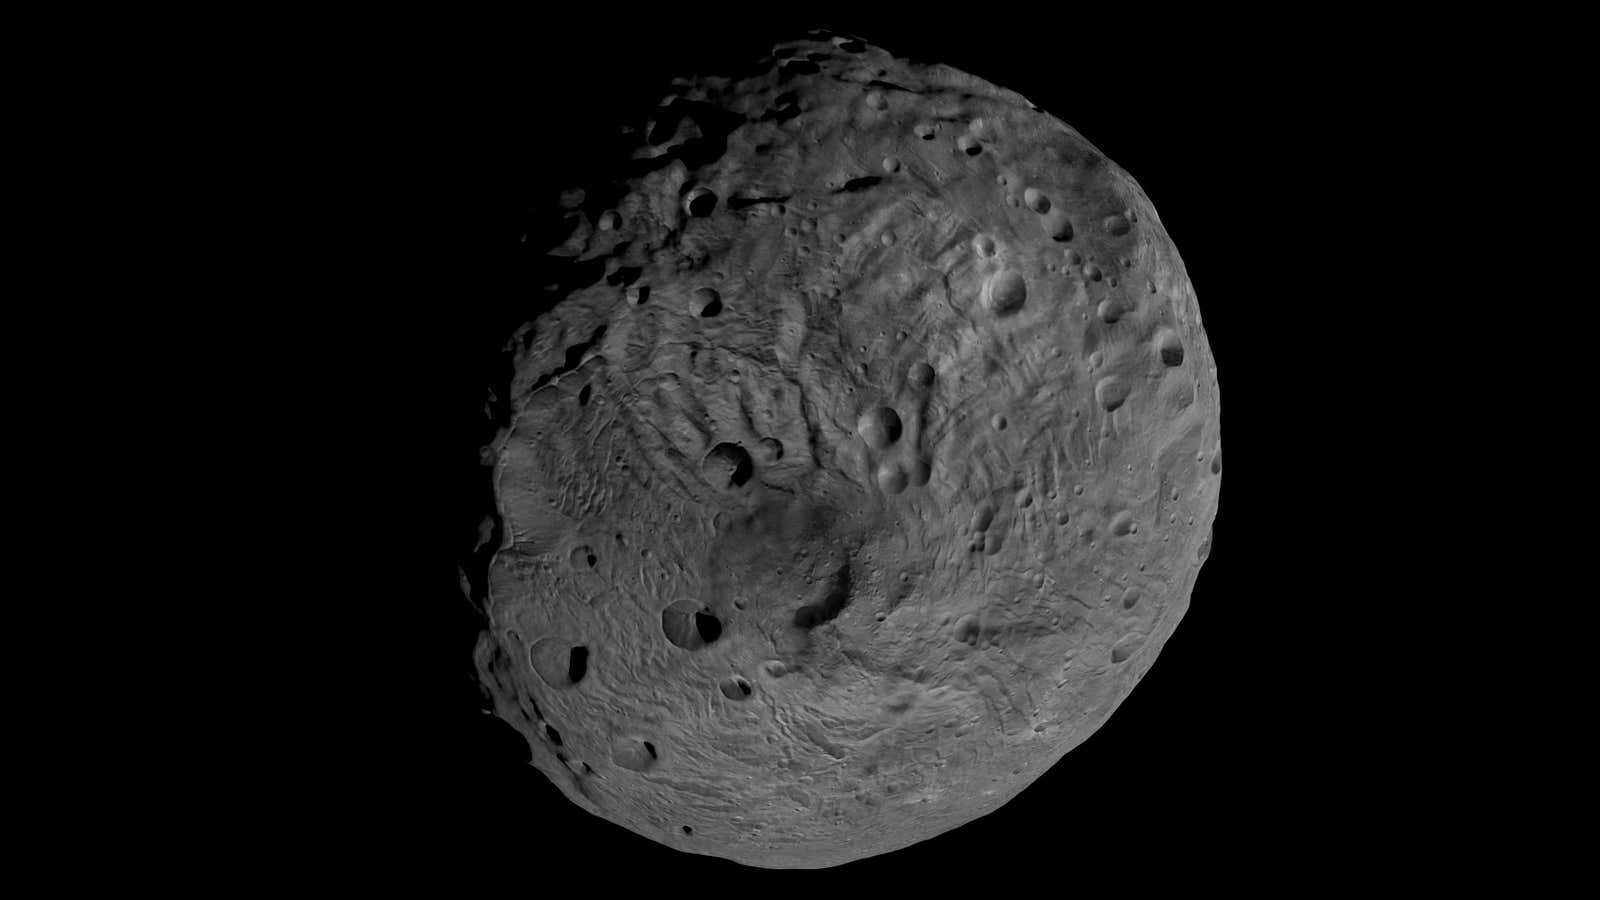 Wouldn’t want to meet the giant asteroid Vesta in a dark alley.